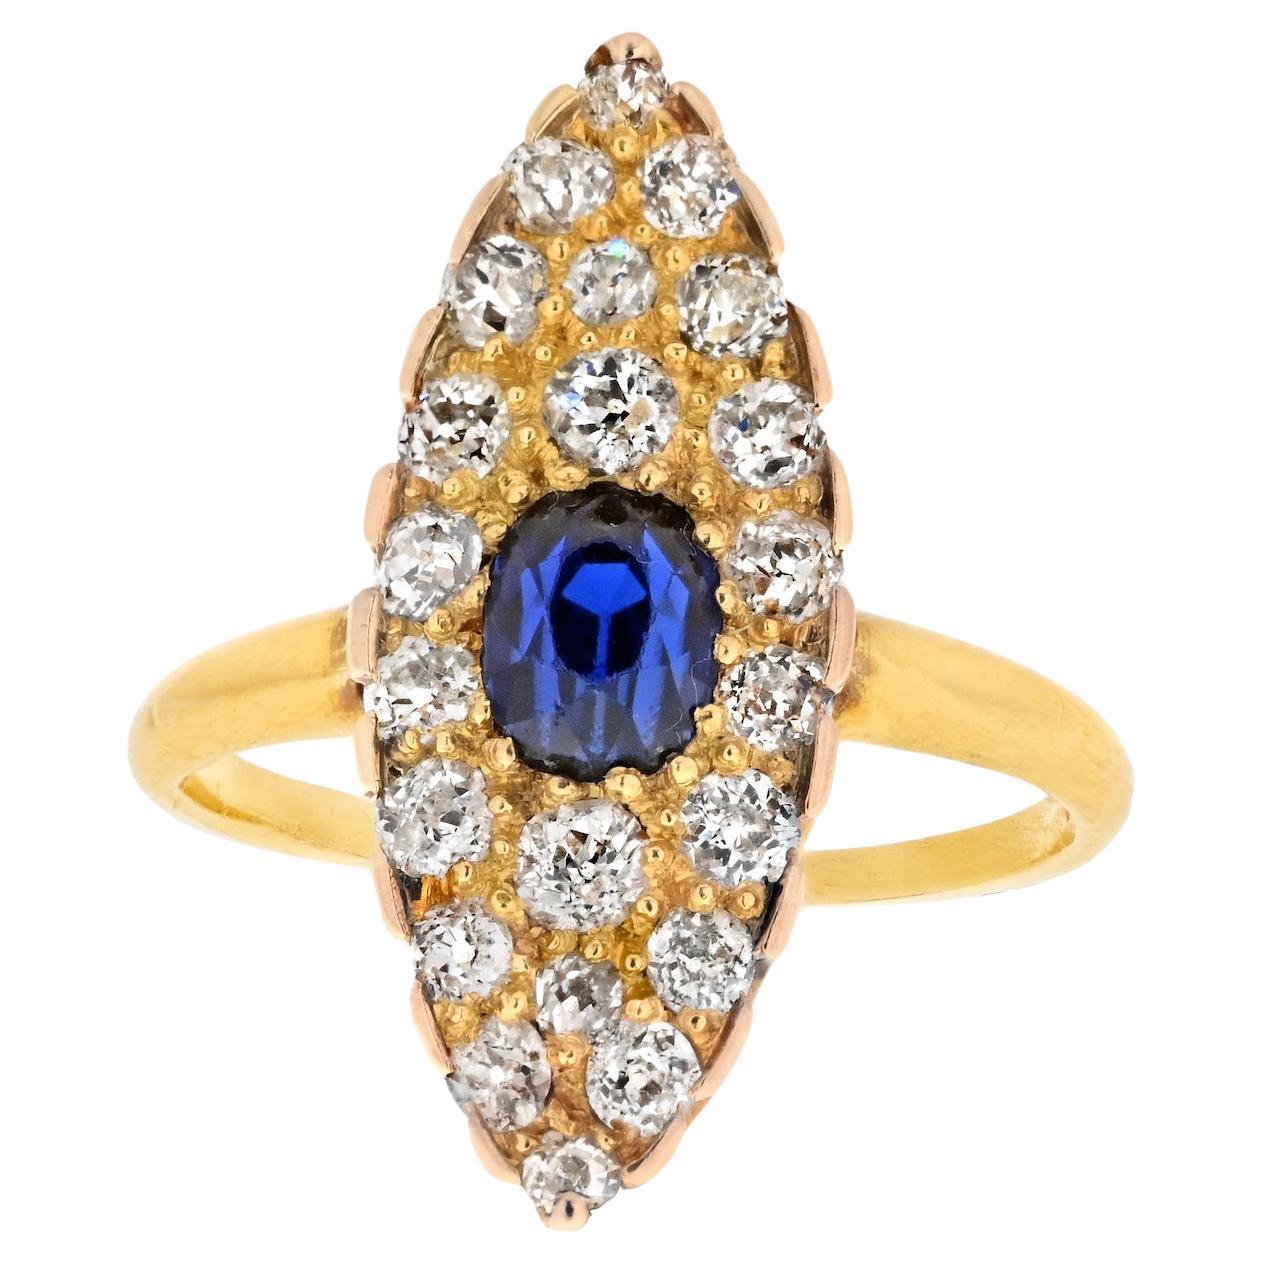 Tiffany & Co. 14K Yellow Gold Burma Sapphire And Old Cut Diamond Navette Ring